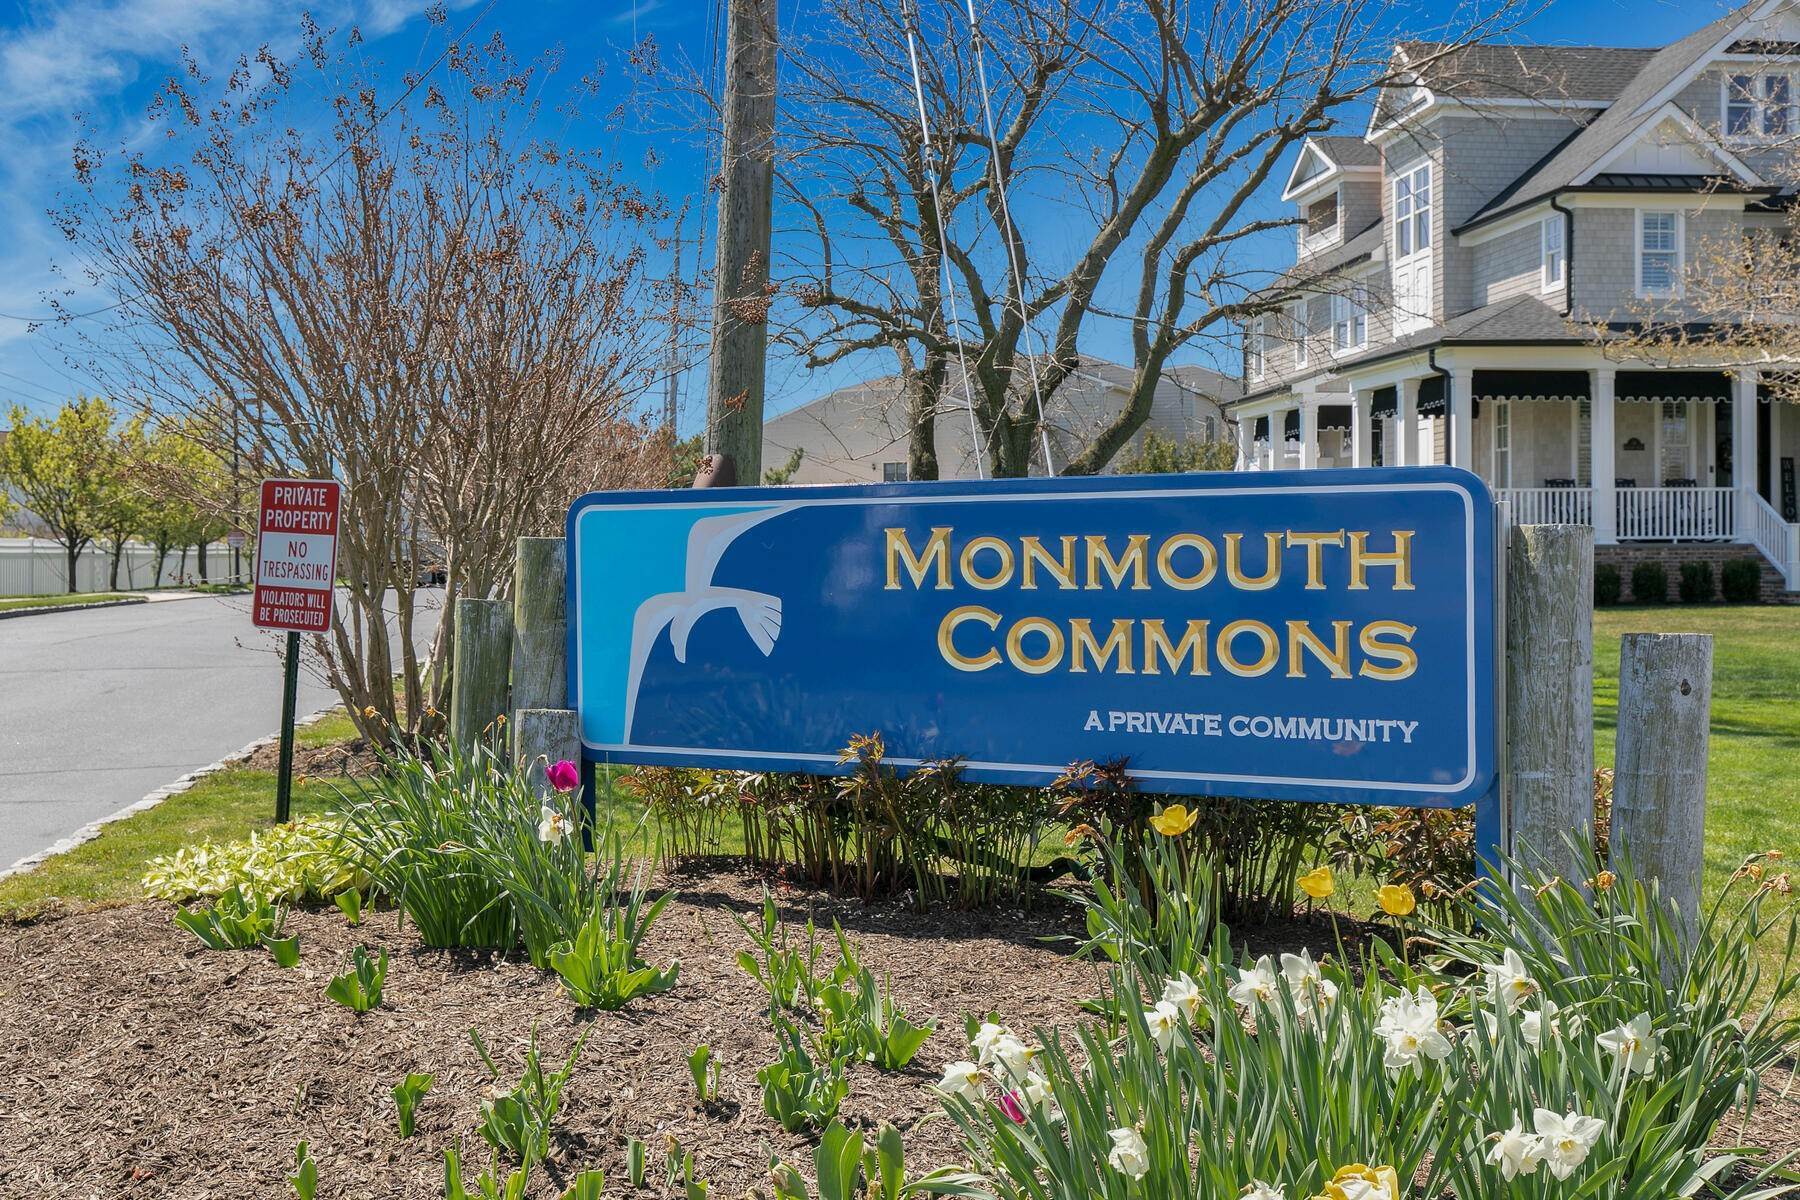 Single Family Homes for Sale at Monmouth Commons 3 Meredith Court Monmouth Beach, New Jersey 07750 United States